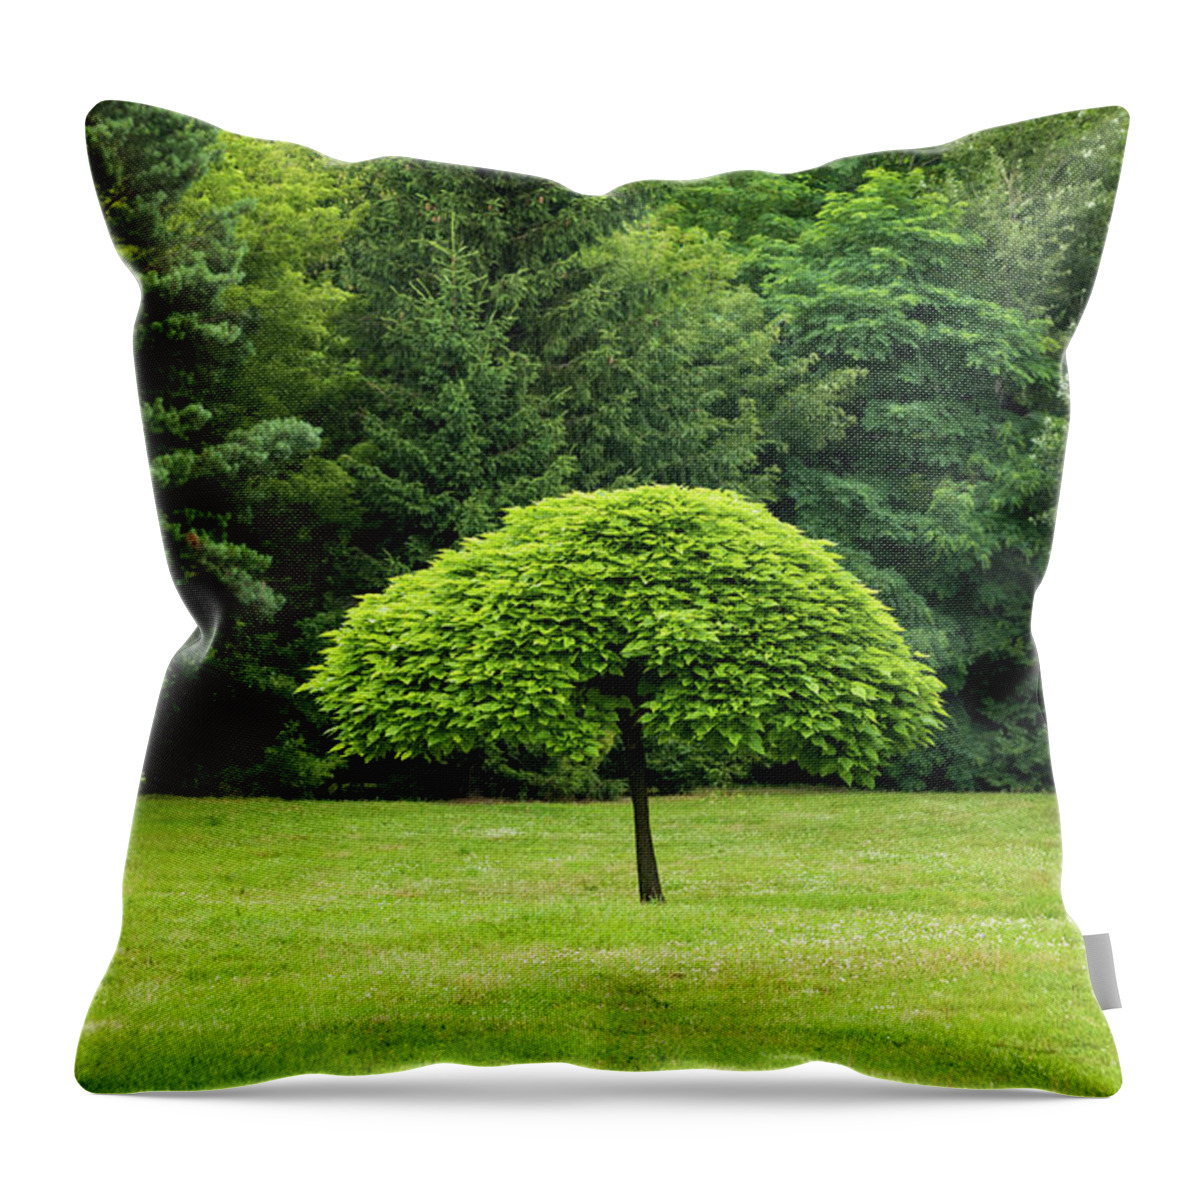 Tree Throw Pillow featuring the photograph Single Tree In The Middle Of Park Lawn by Artur Bogacki